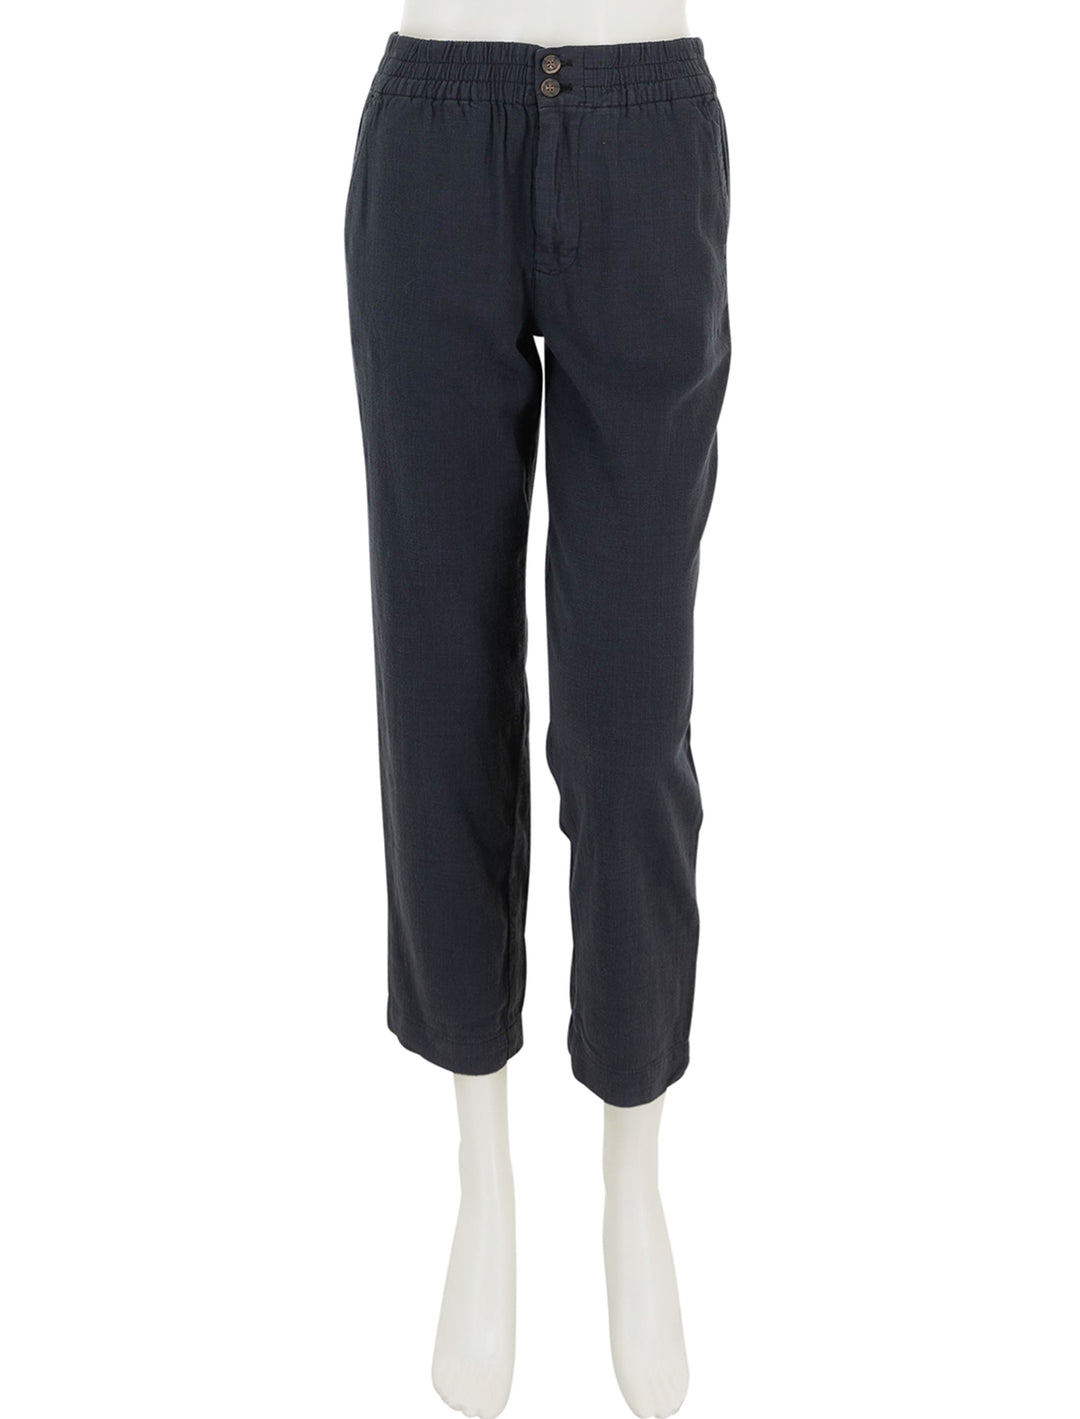 Front view of Marine Layer's elle pant in phantom.